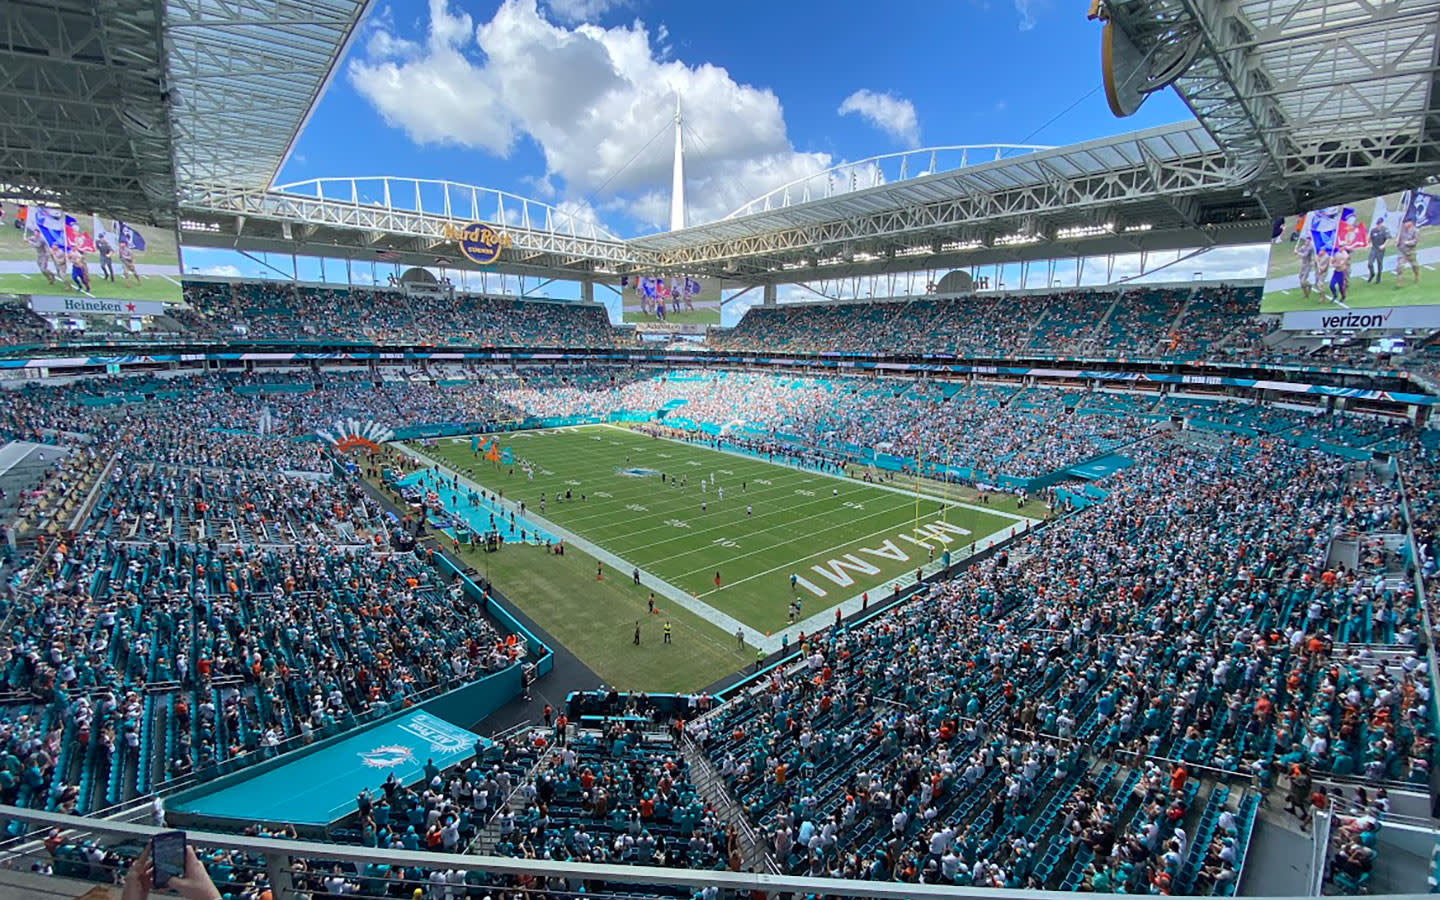 https://assets.simpleviewinc.com/simpleview/image/upload/c_limit,w_1600/crm/miamifl/Dolphin_Raiders_Nov19_2023_Hard_Rock_Stadium_1440x900_571343FD-F4DC-51B7-A69DB59865AC37AF-57133915b150615_571351b9-9611-5b1b-721674ef80691e2d.jpg